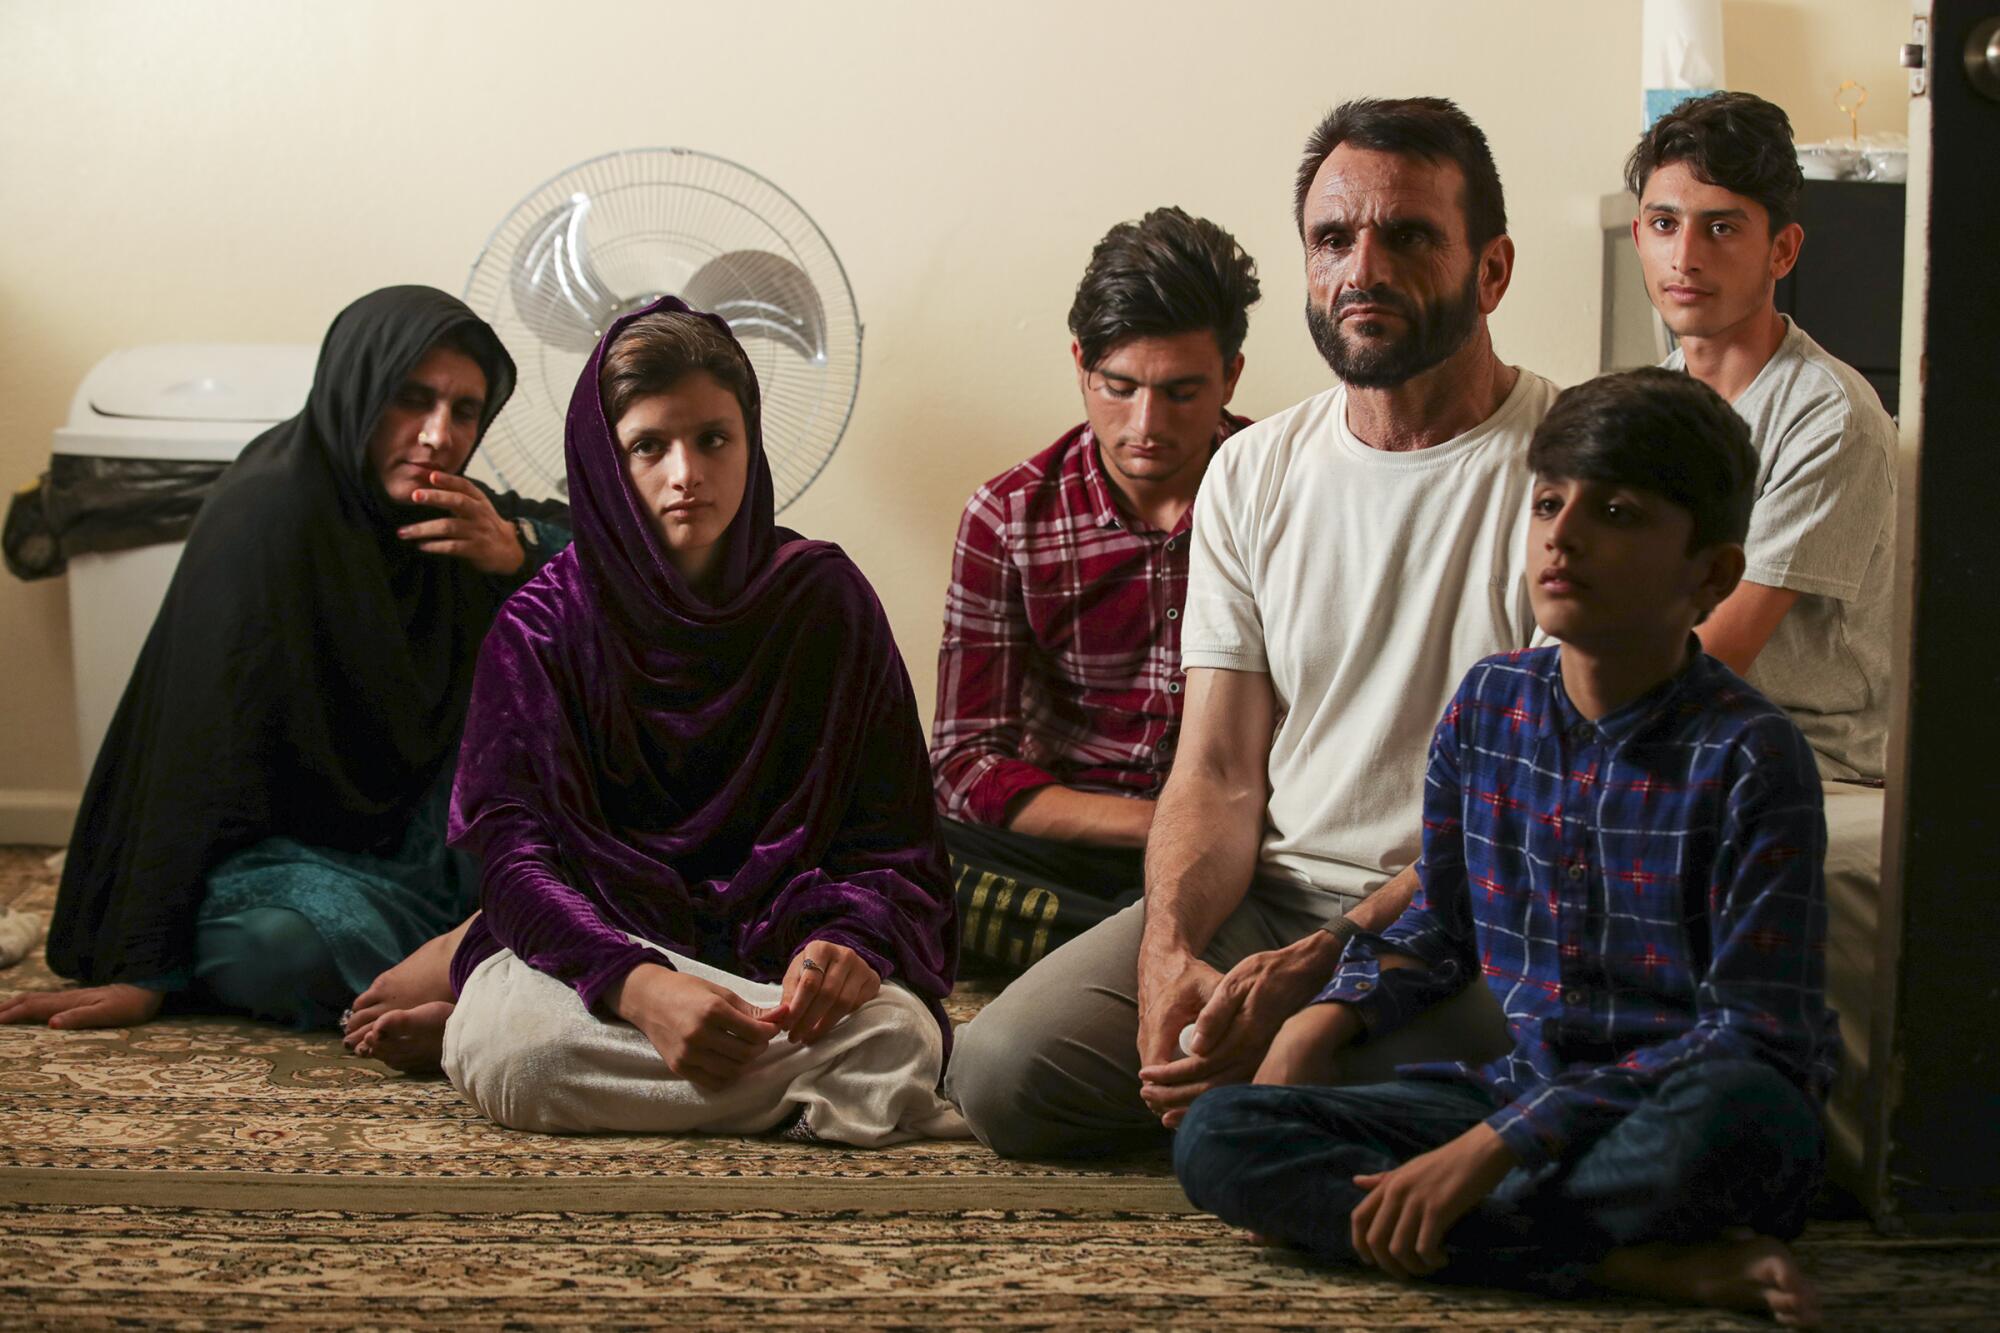 Afghan refugee family of six is forced to live with another family of five in a small one bedroom apartment